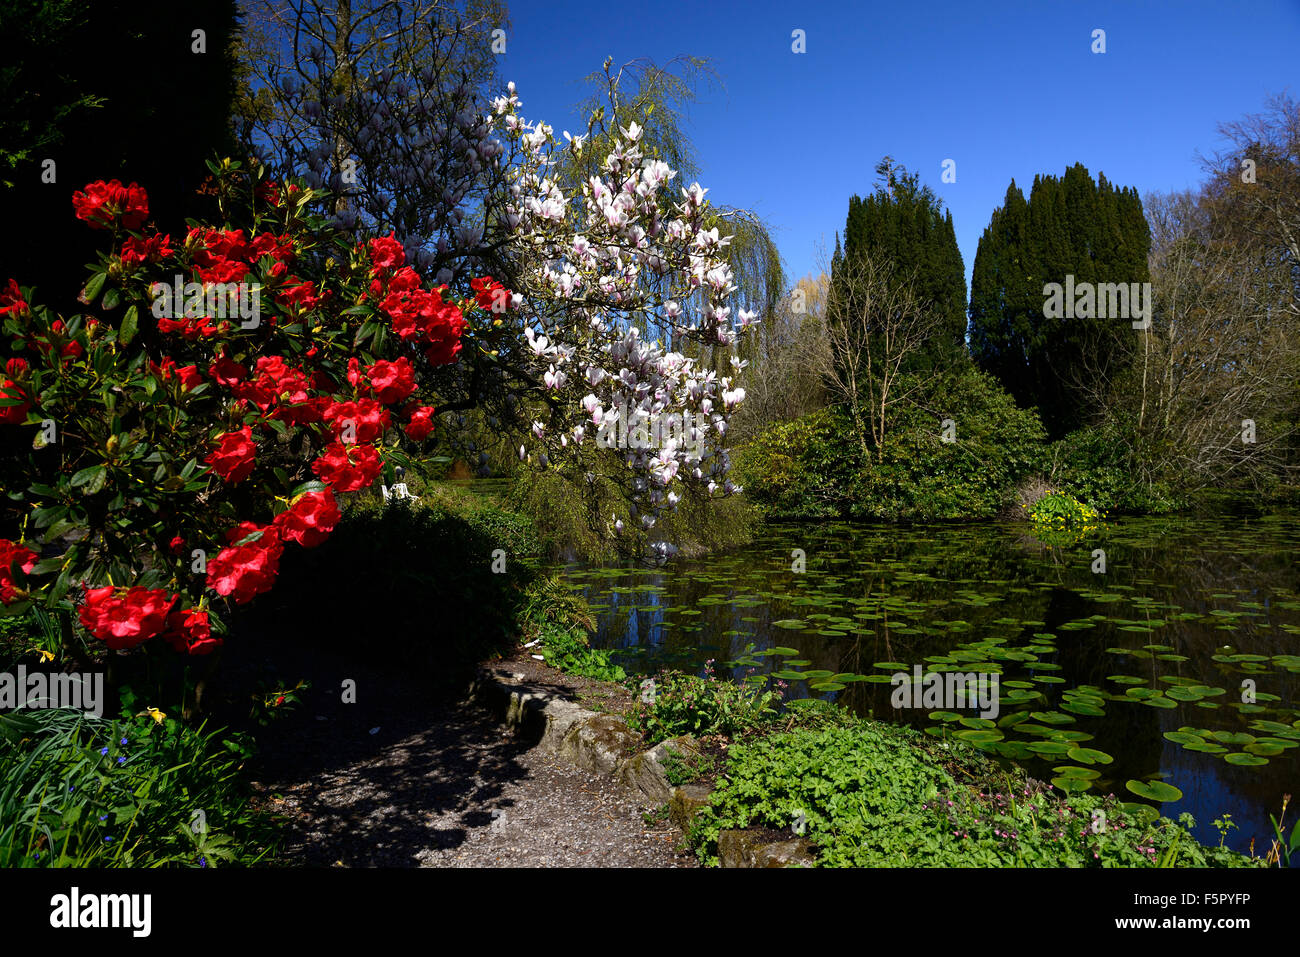 rhododendron elizabeth magnolia x soulangeana red white flower flowers flowering pond lake water feature Altamont gardens Carlow Stock Photo